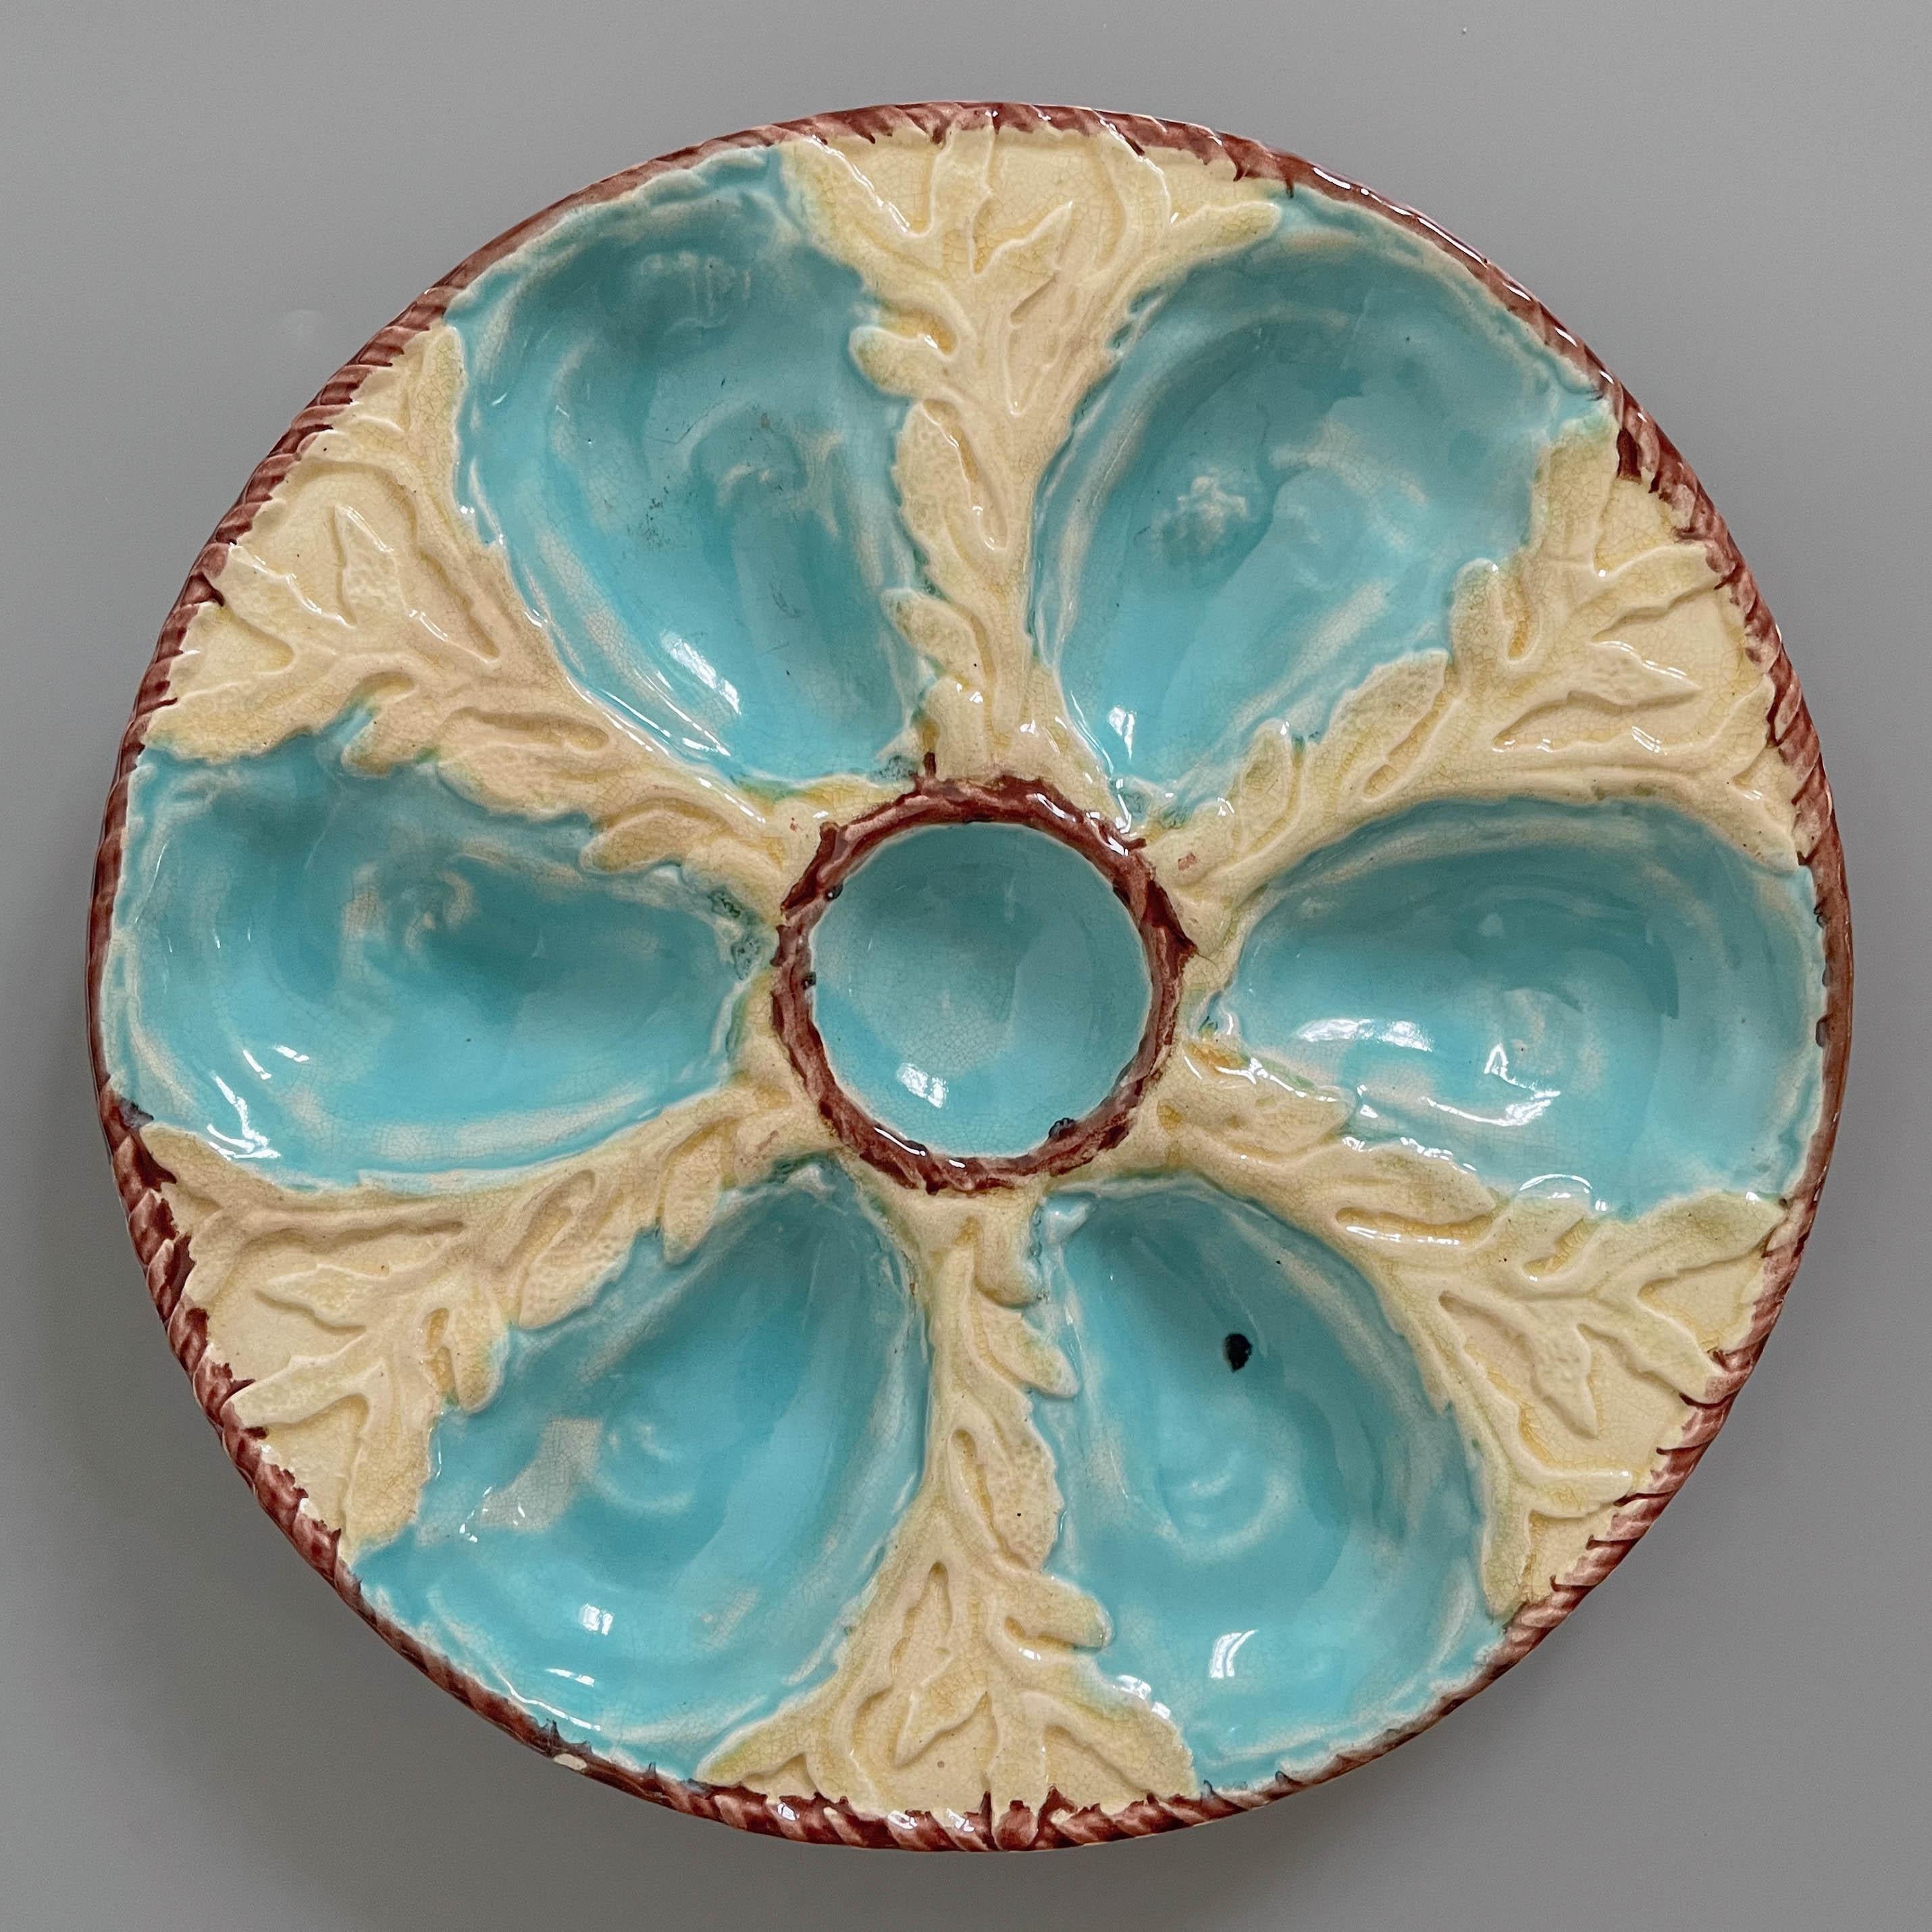 A 19th Century English glazed majolica oyster plate with six turquoise blue oyster wells surrounding a center well for sauce on a yellow ground with seaweed relief. A brown nautical rope border encircles the center well and the outer rim. The verso